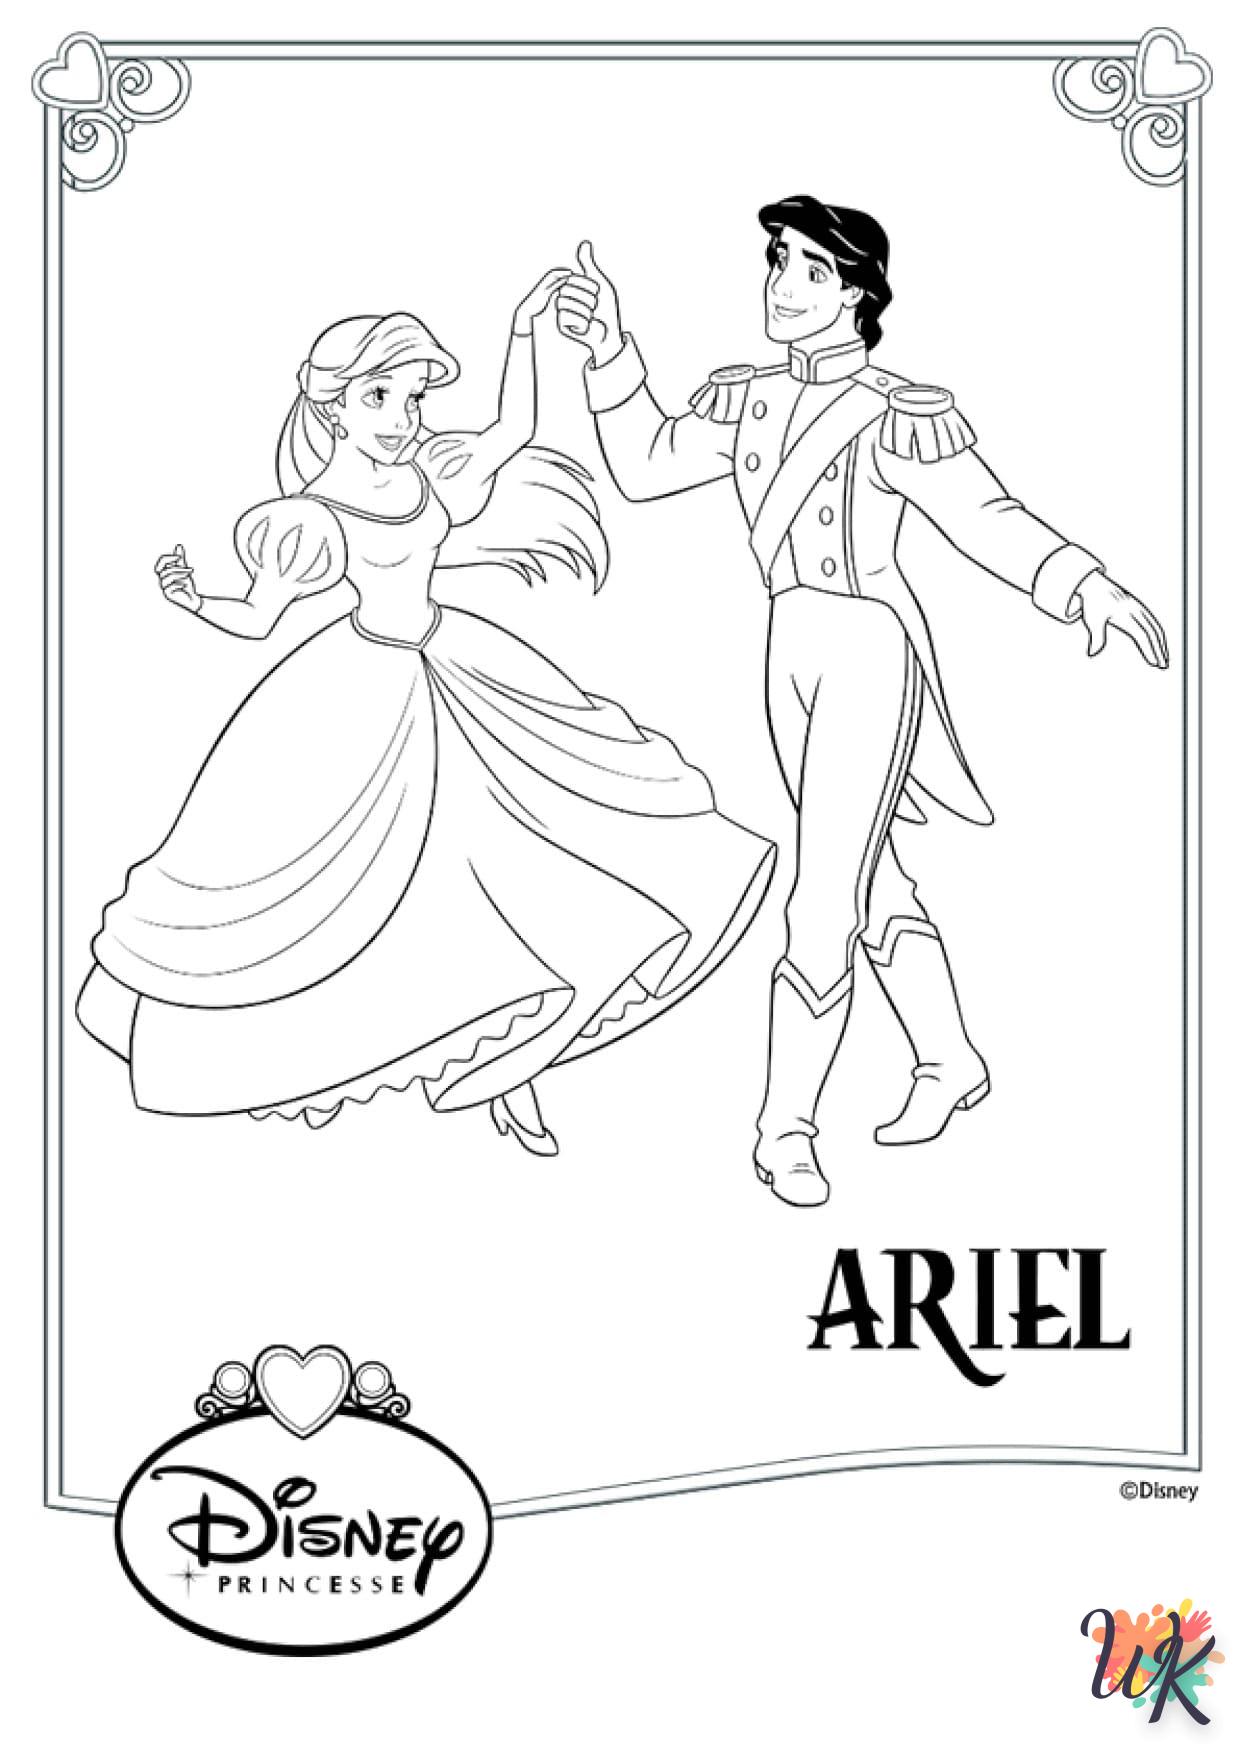 Disney coloring page for children aged 3 to print